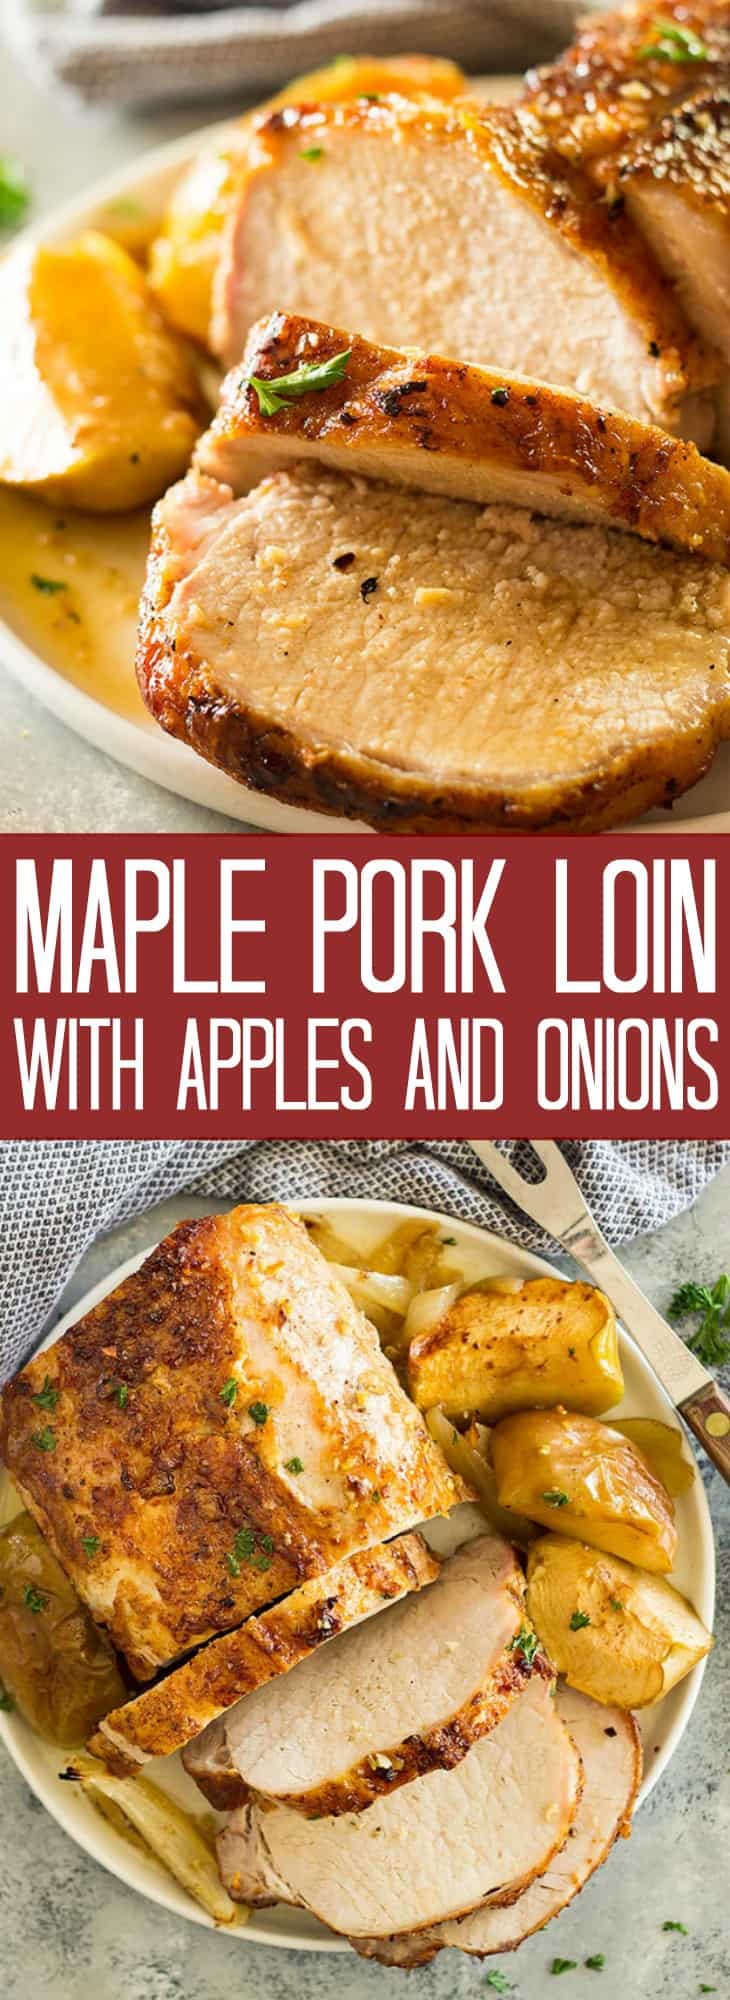 Maple Pork Loin with Apples and Onions - Countryside Cravings